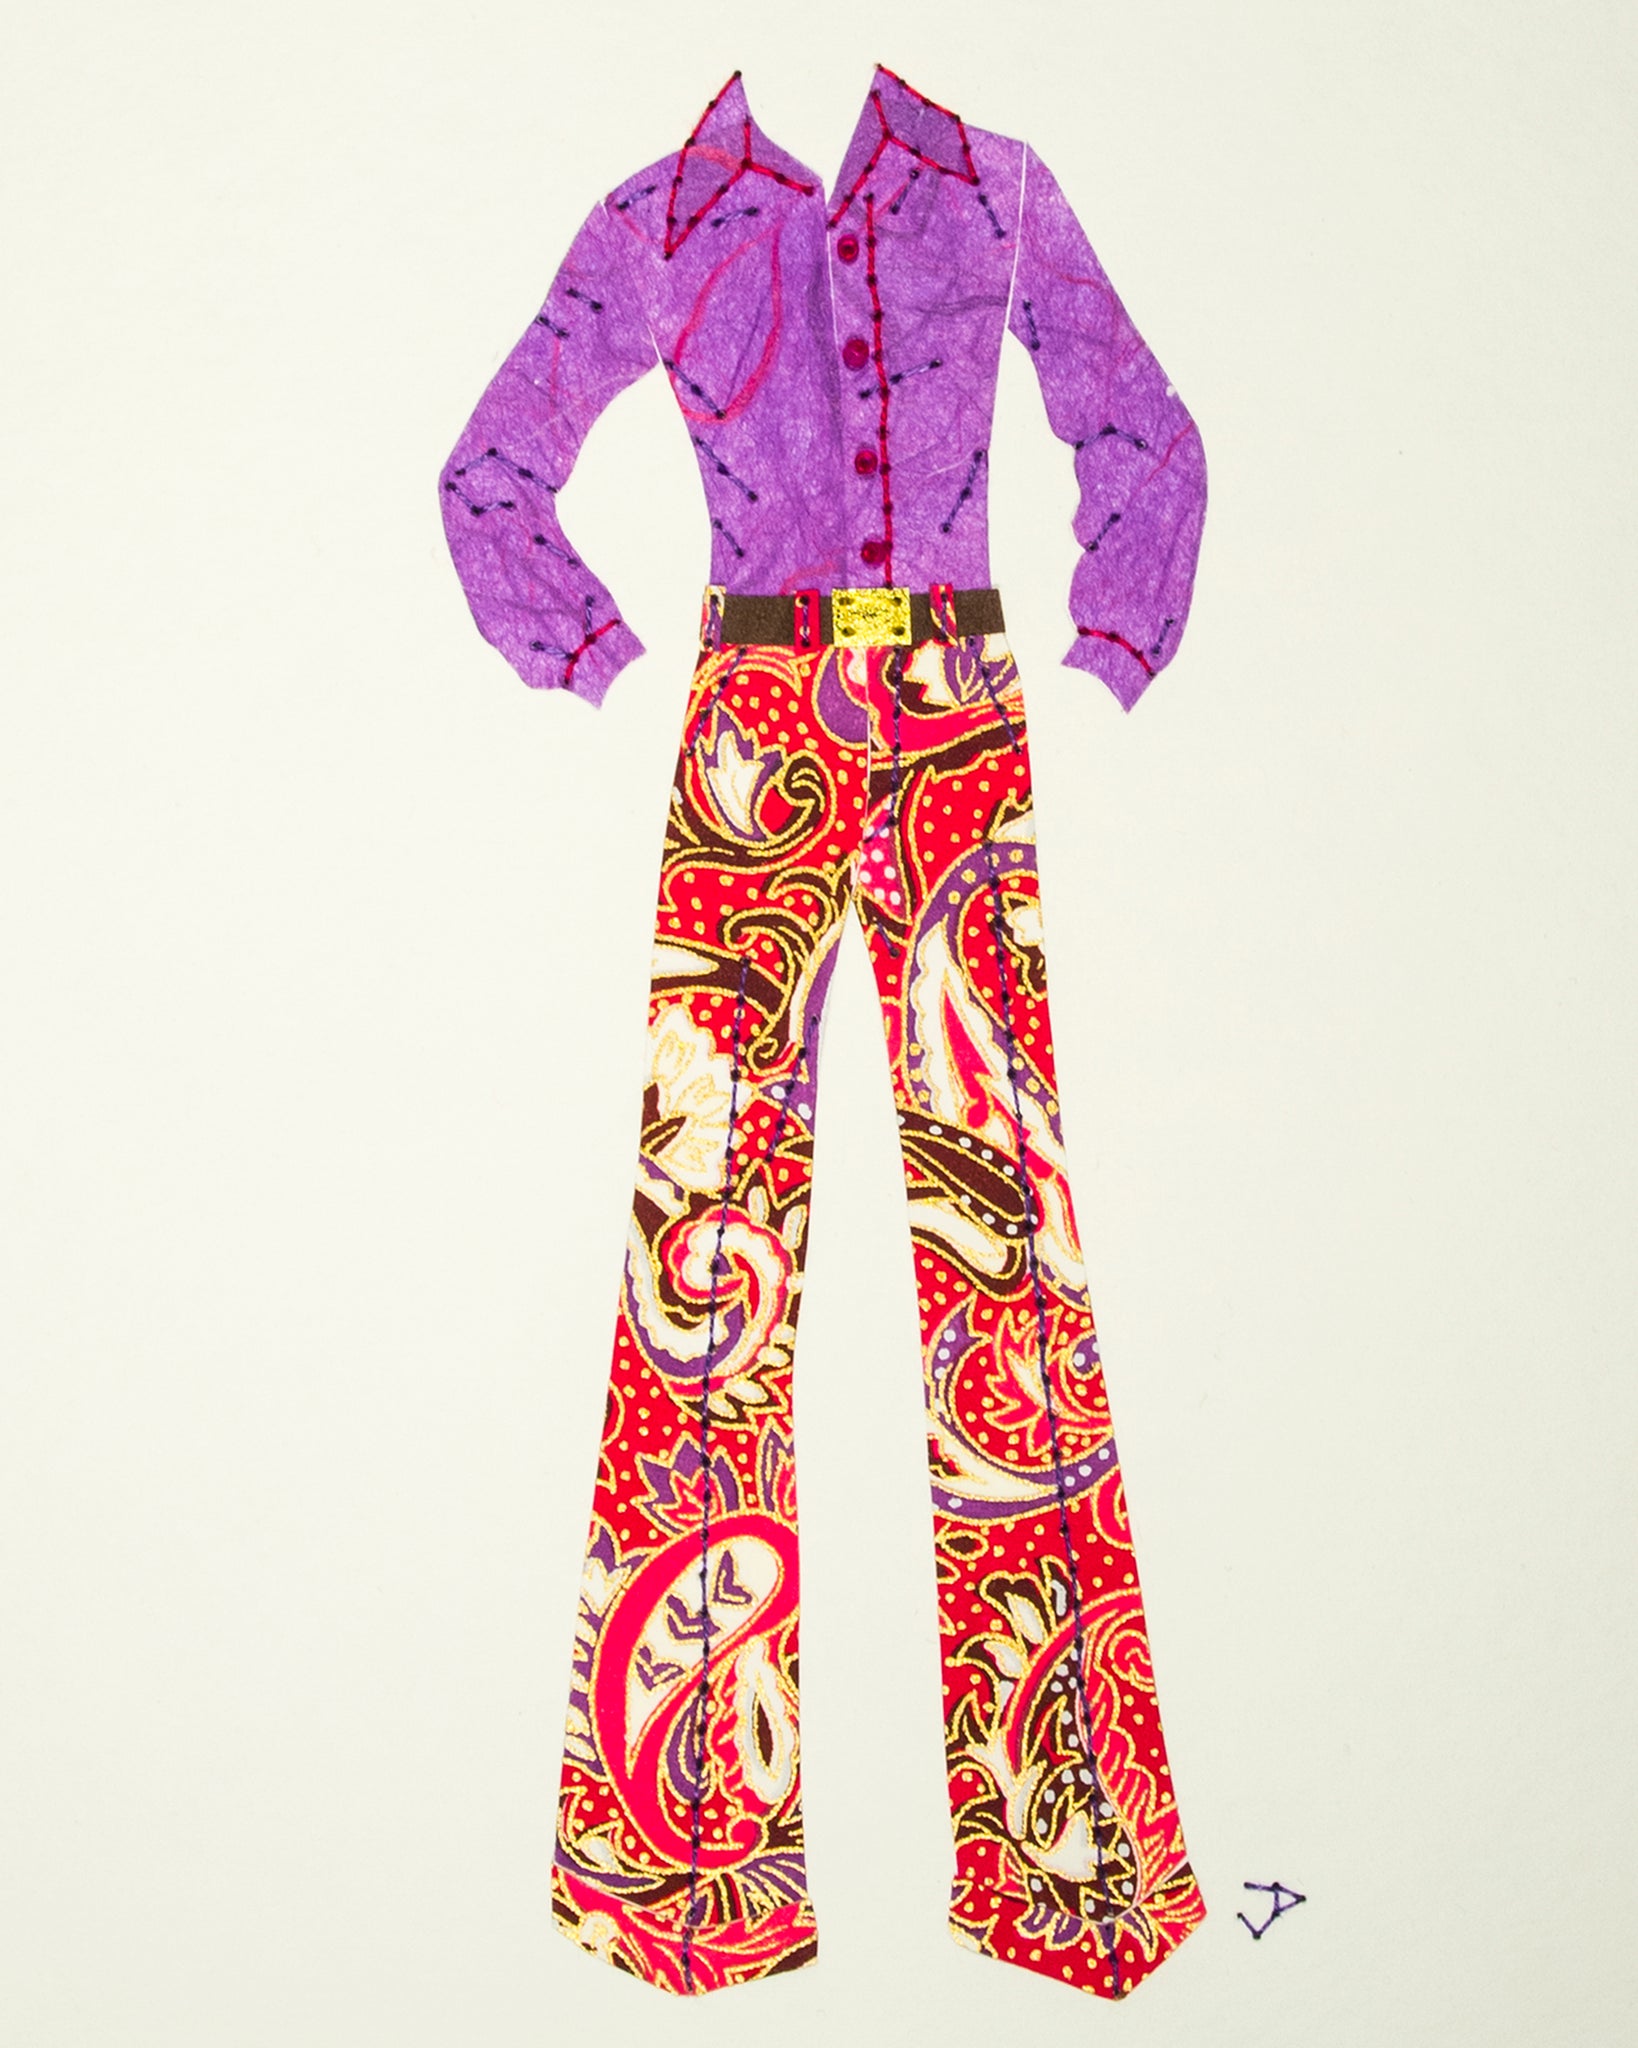 1970s men’s outfit in pink and purple paisley. 2016